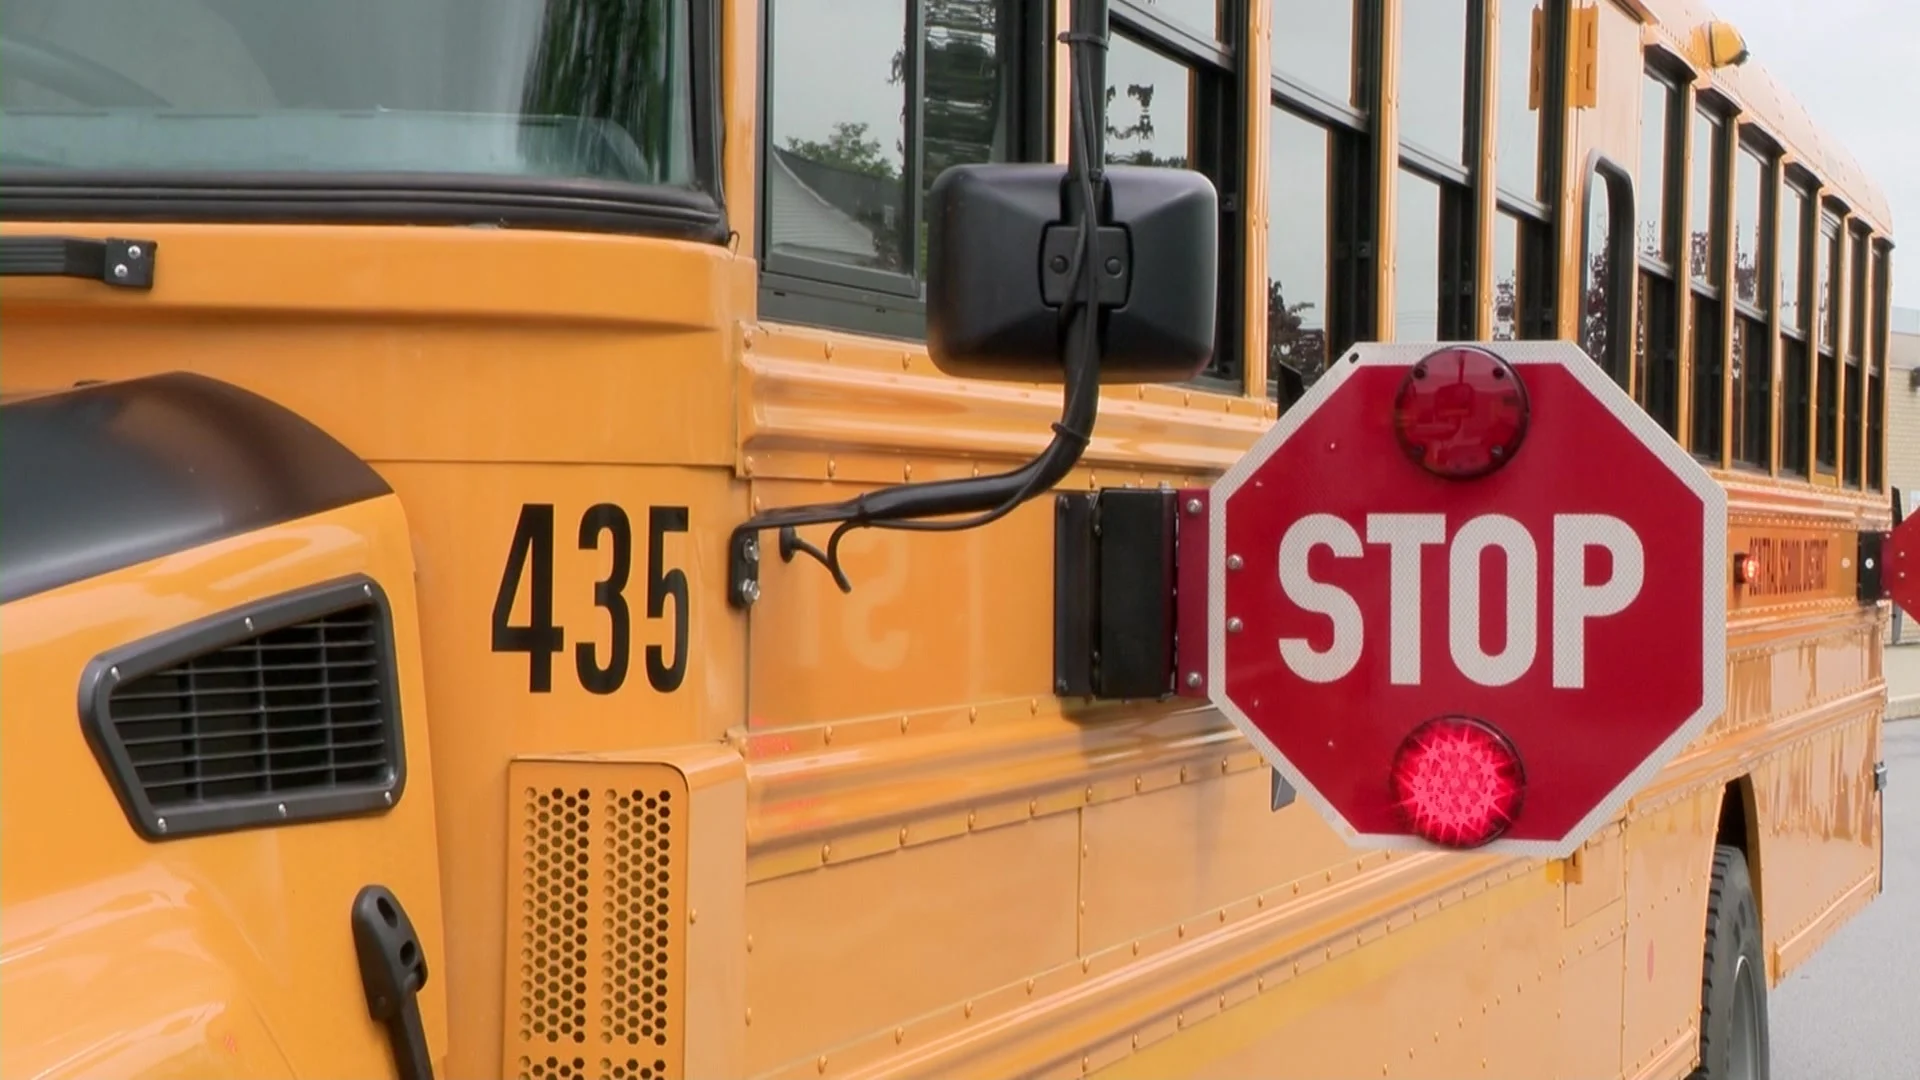 Erratic school bus driver in Monsey identified, traced to private school